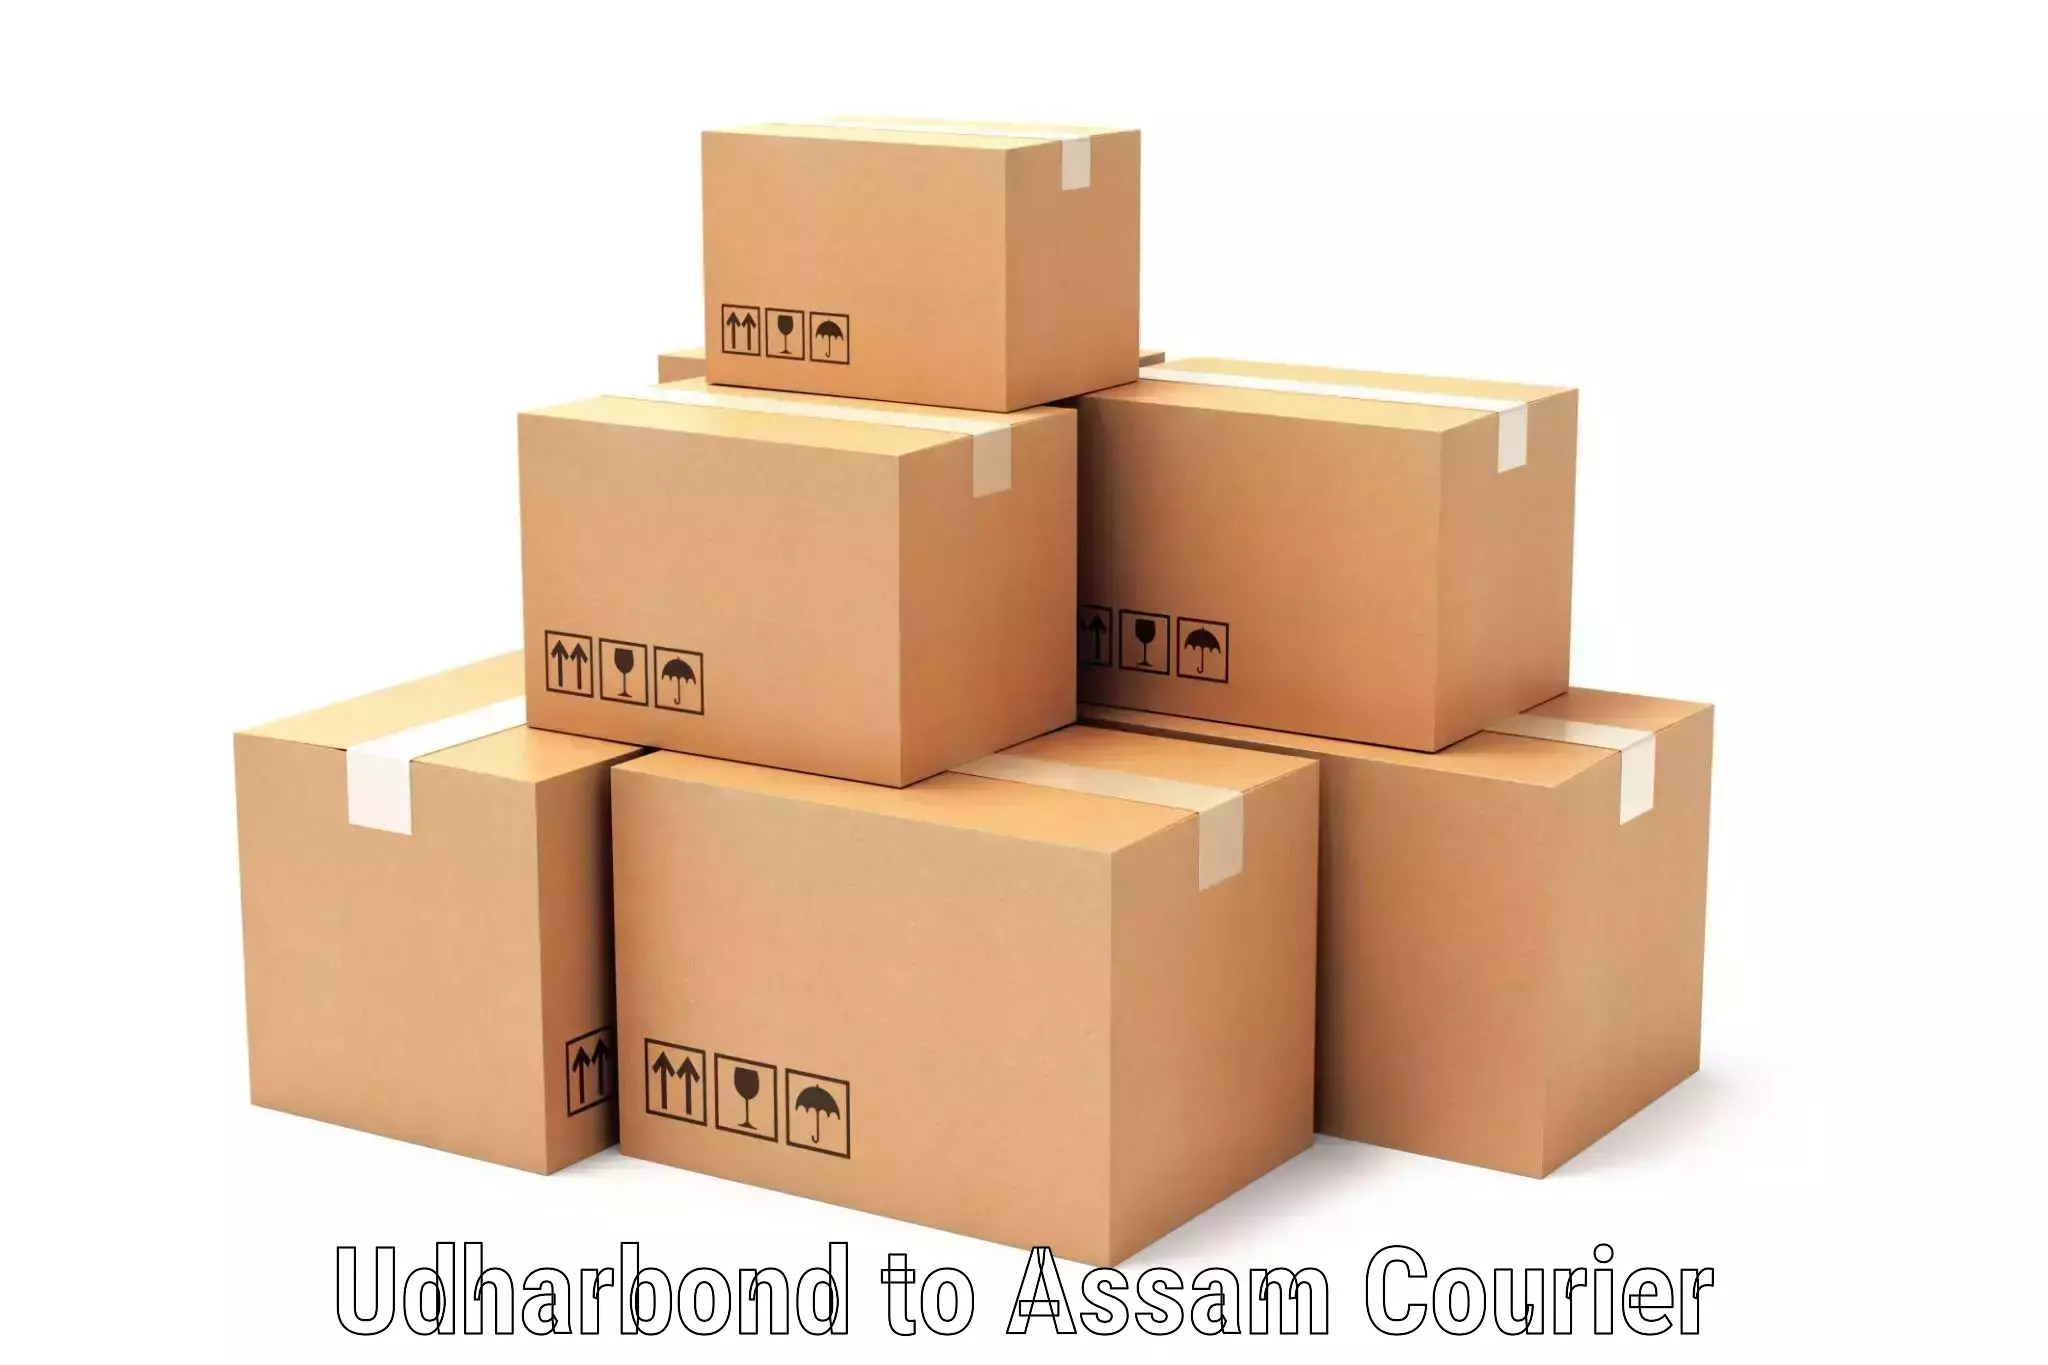 Parcel handling and care in Udharbond to Amoni